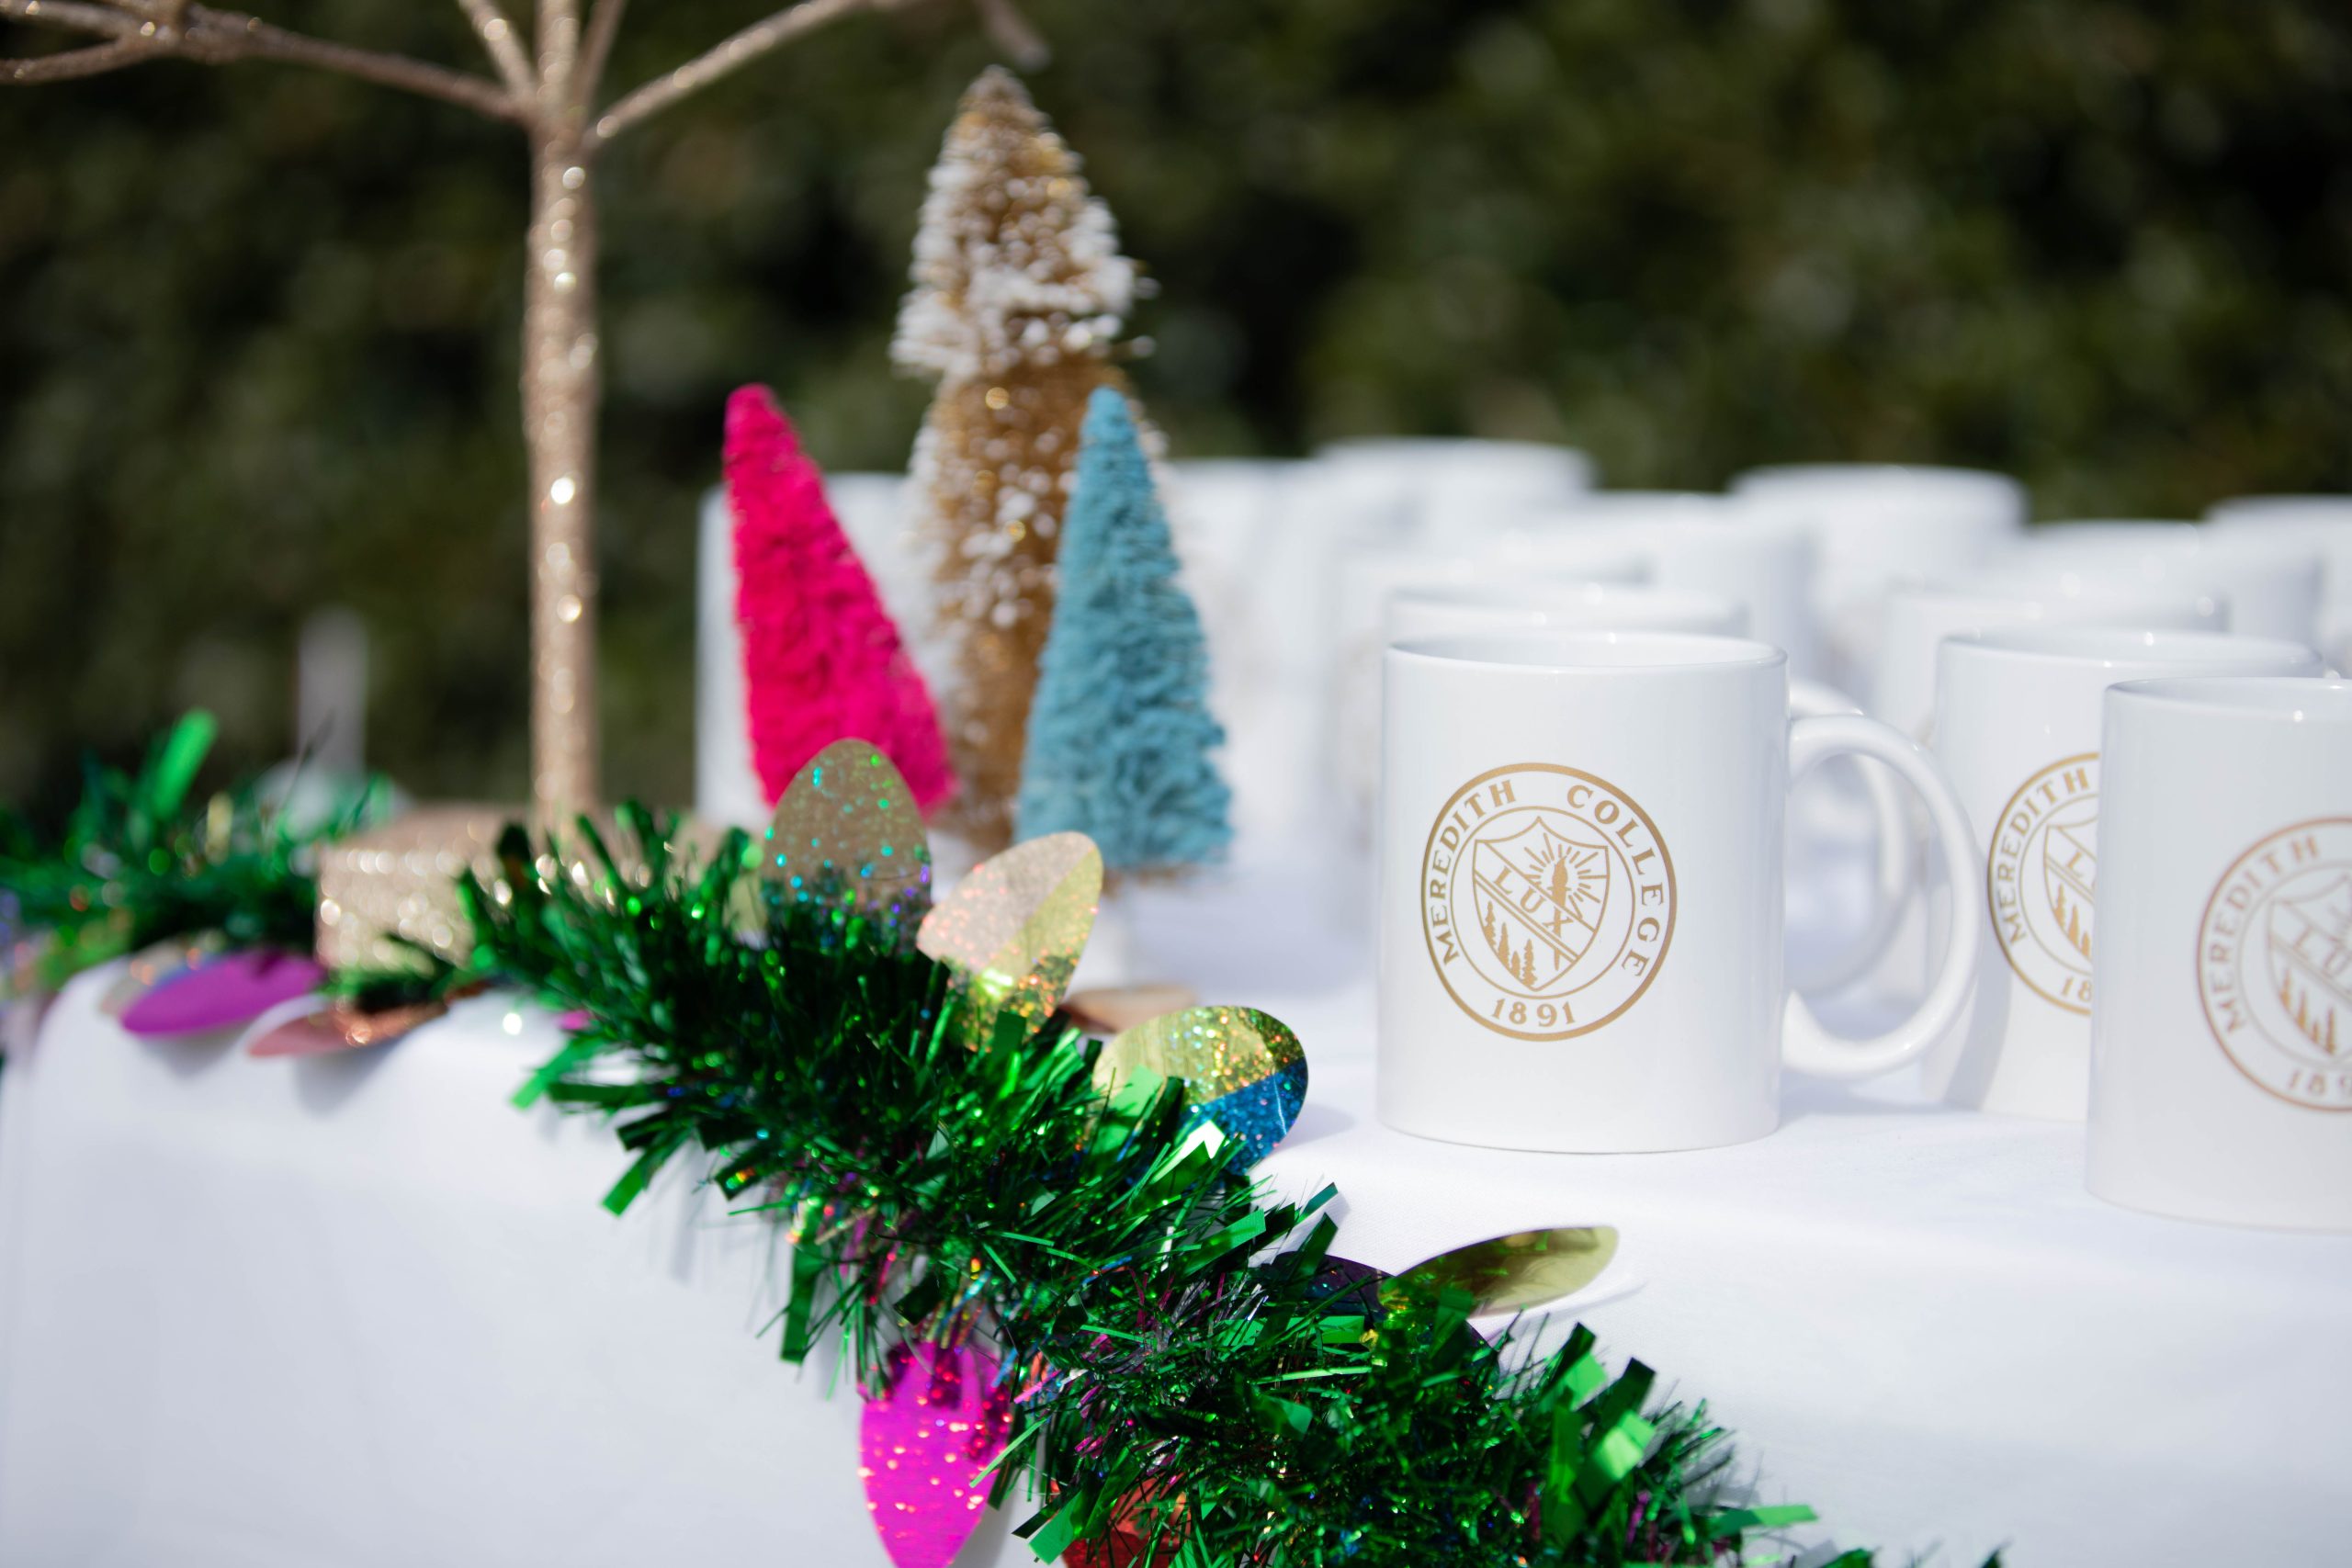 Table with holiday decorations and Meredith mugs